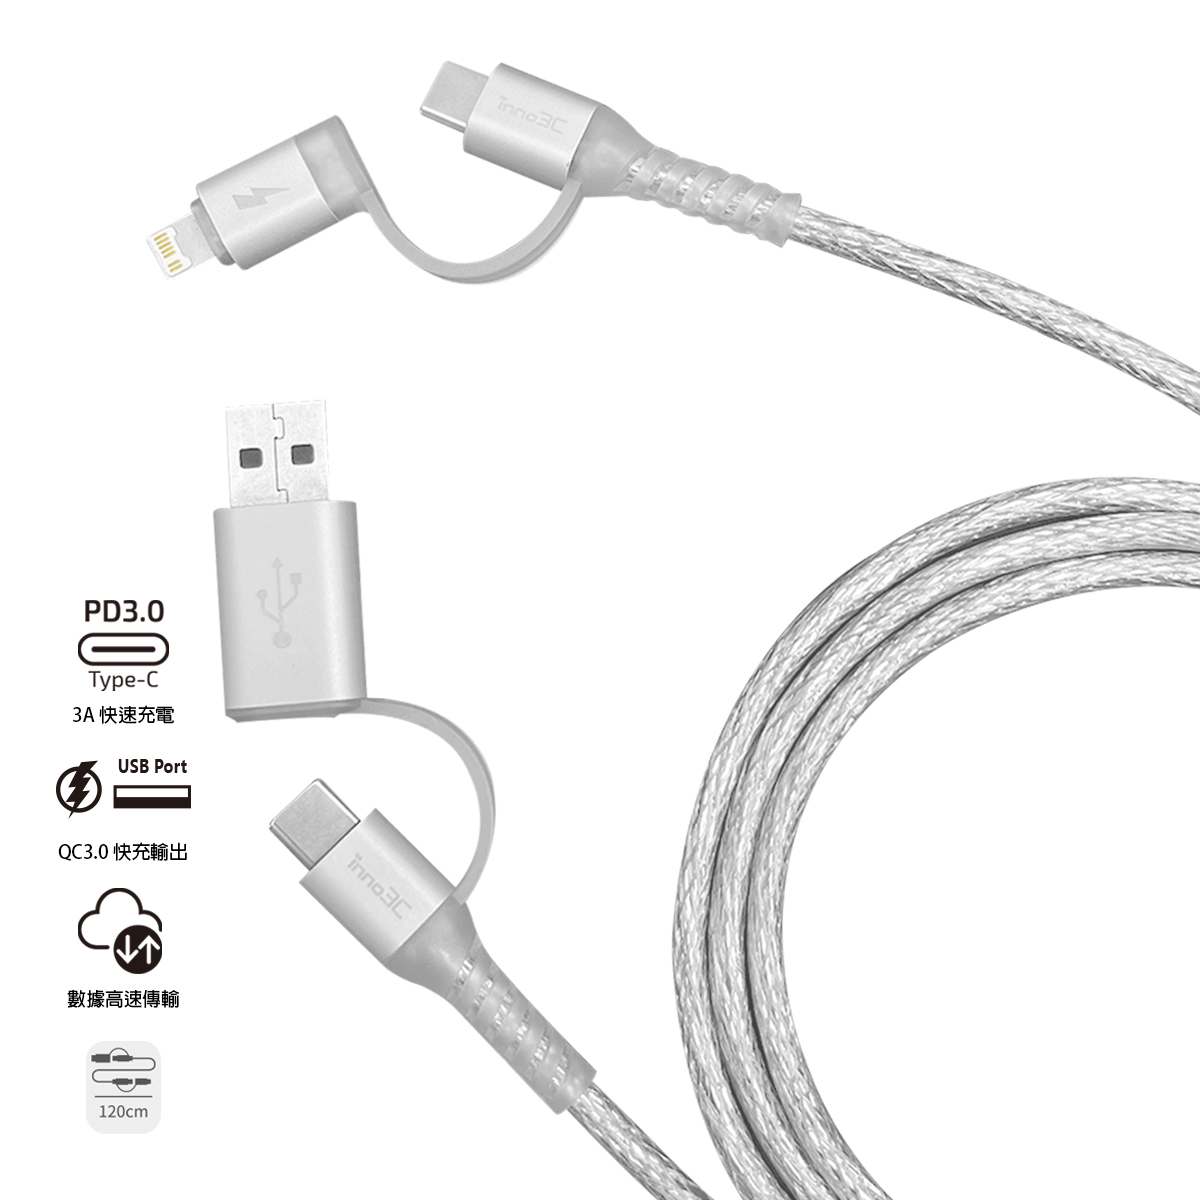 inno3C i-4LA-12 4 in 1 Lightning/Type-C to USB/Type-C Cable (Transparent Silver)